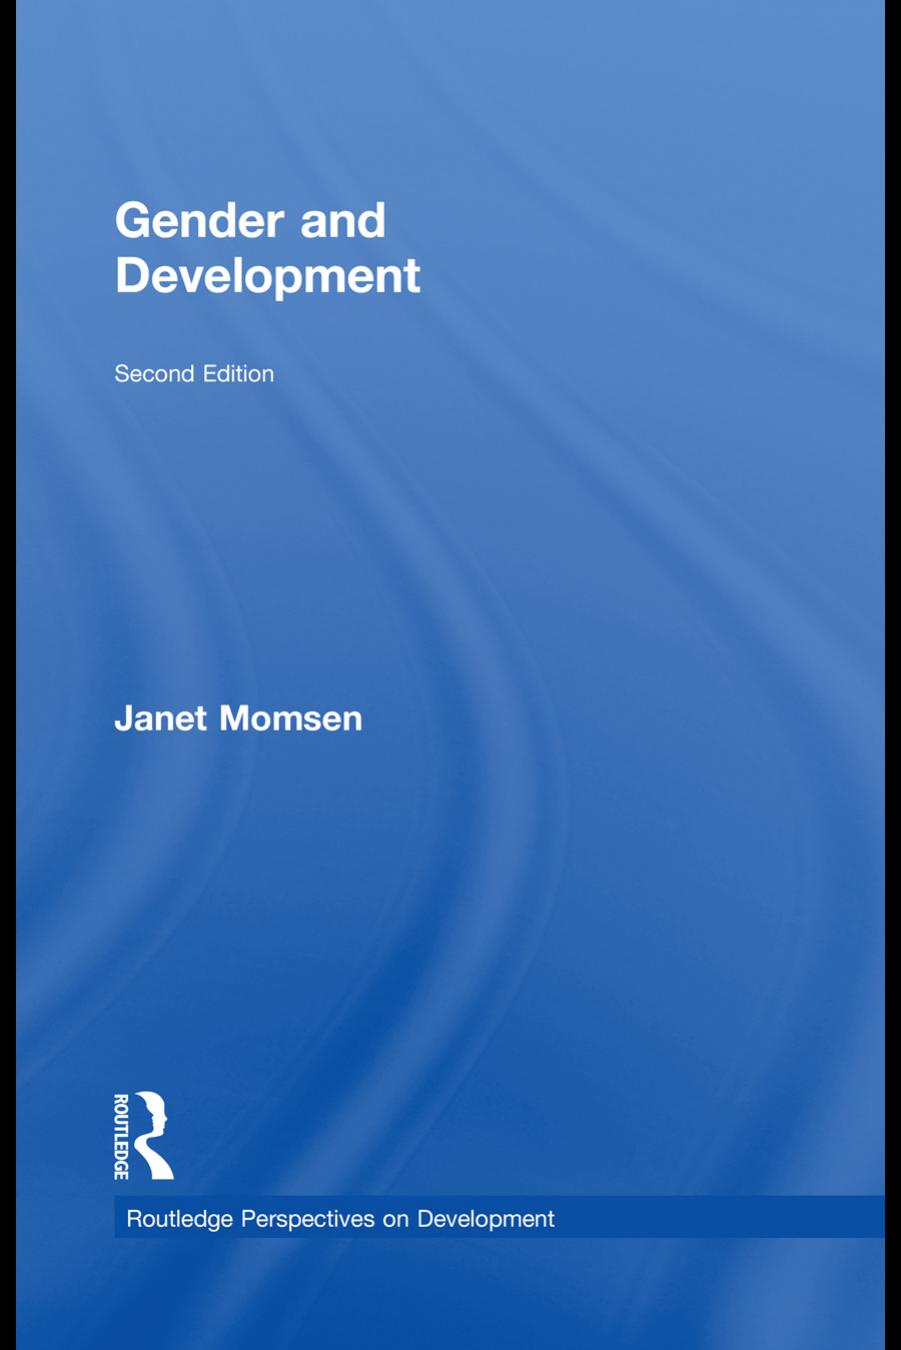 Gender and Development, Second Edition